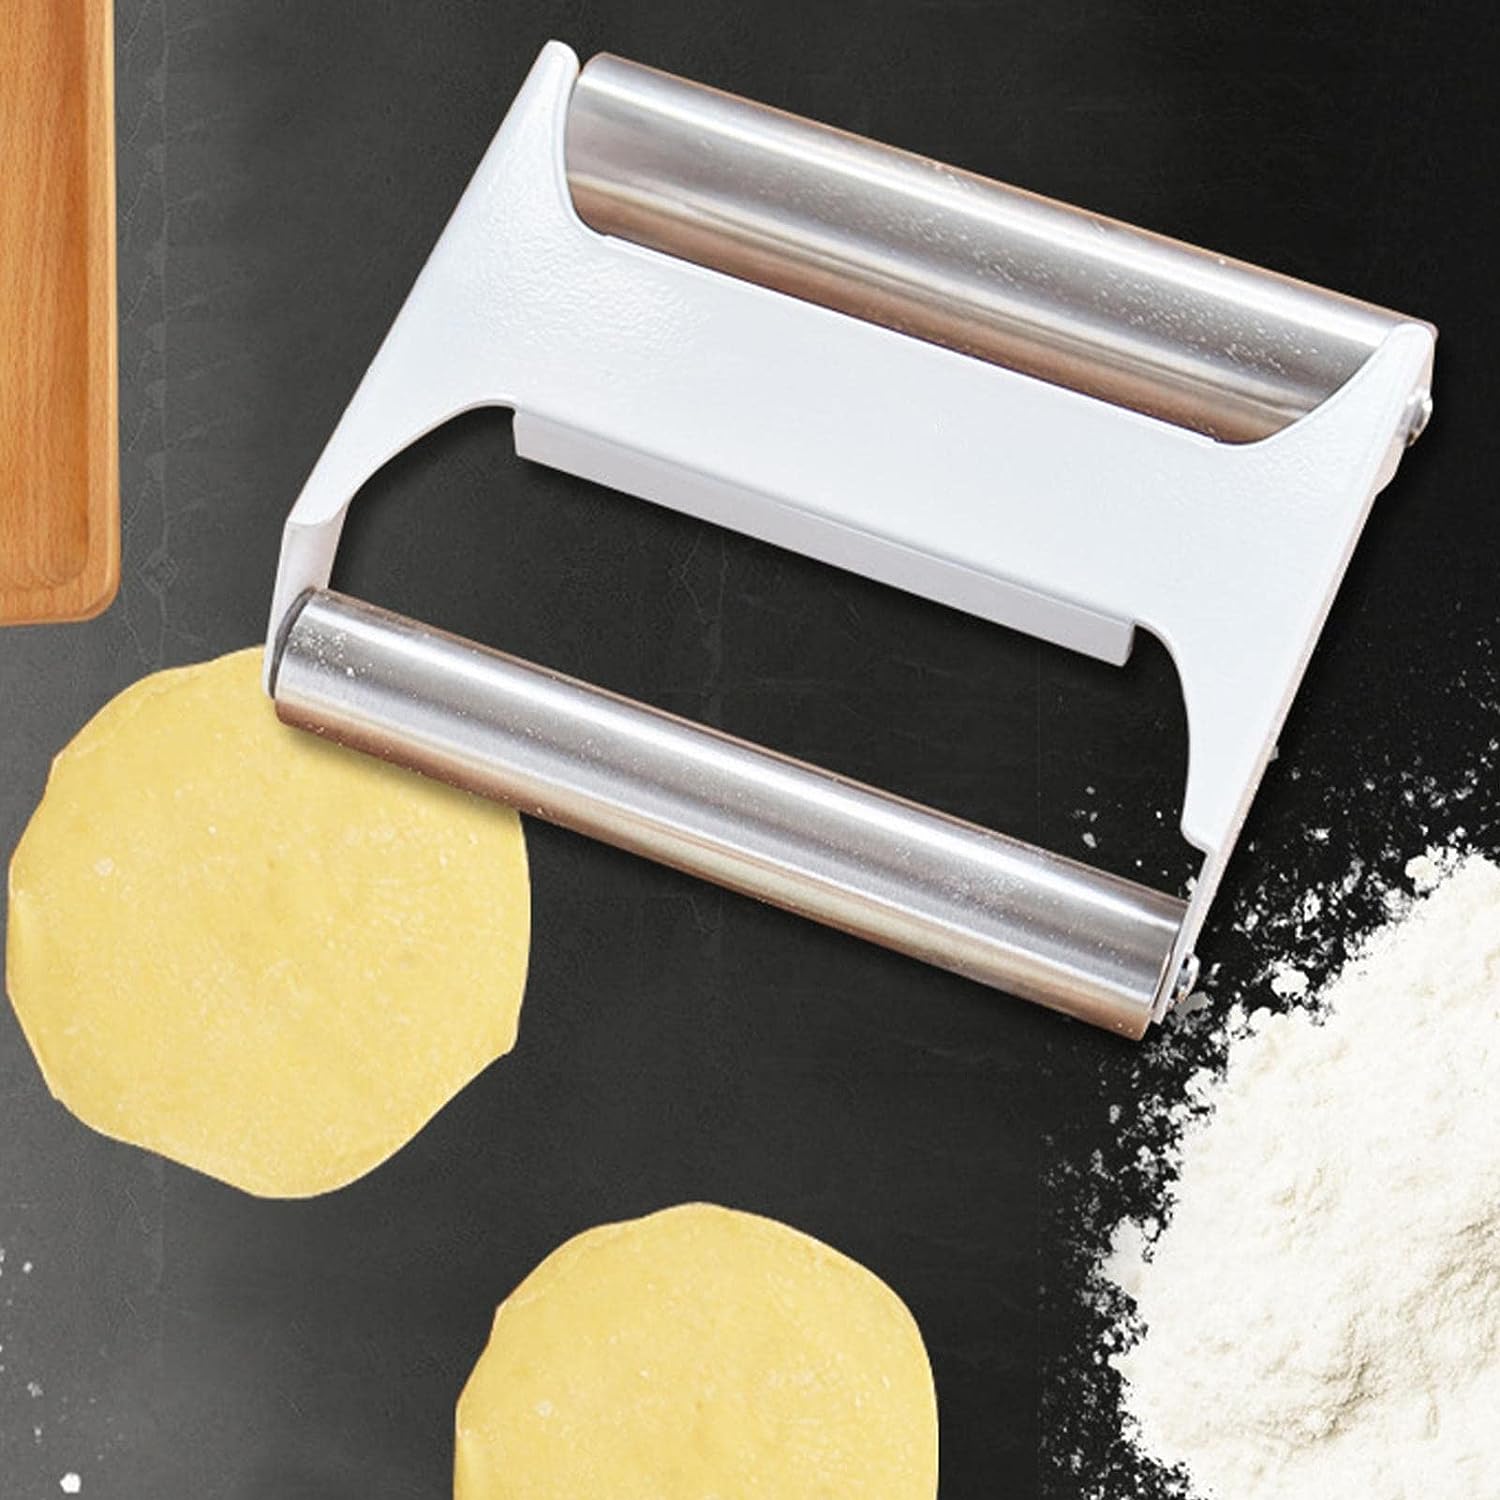 Double-Sided Stainless Steel Dough Roller for Baking placed on the table next to some Dumplings